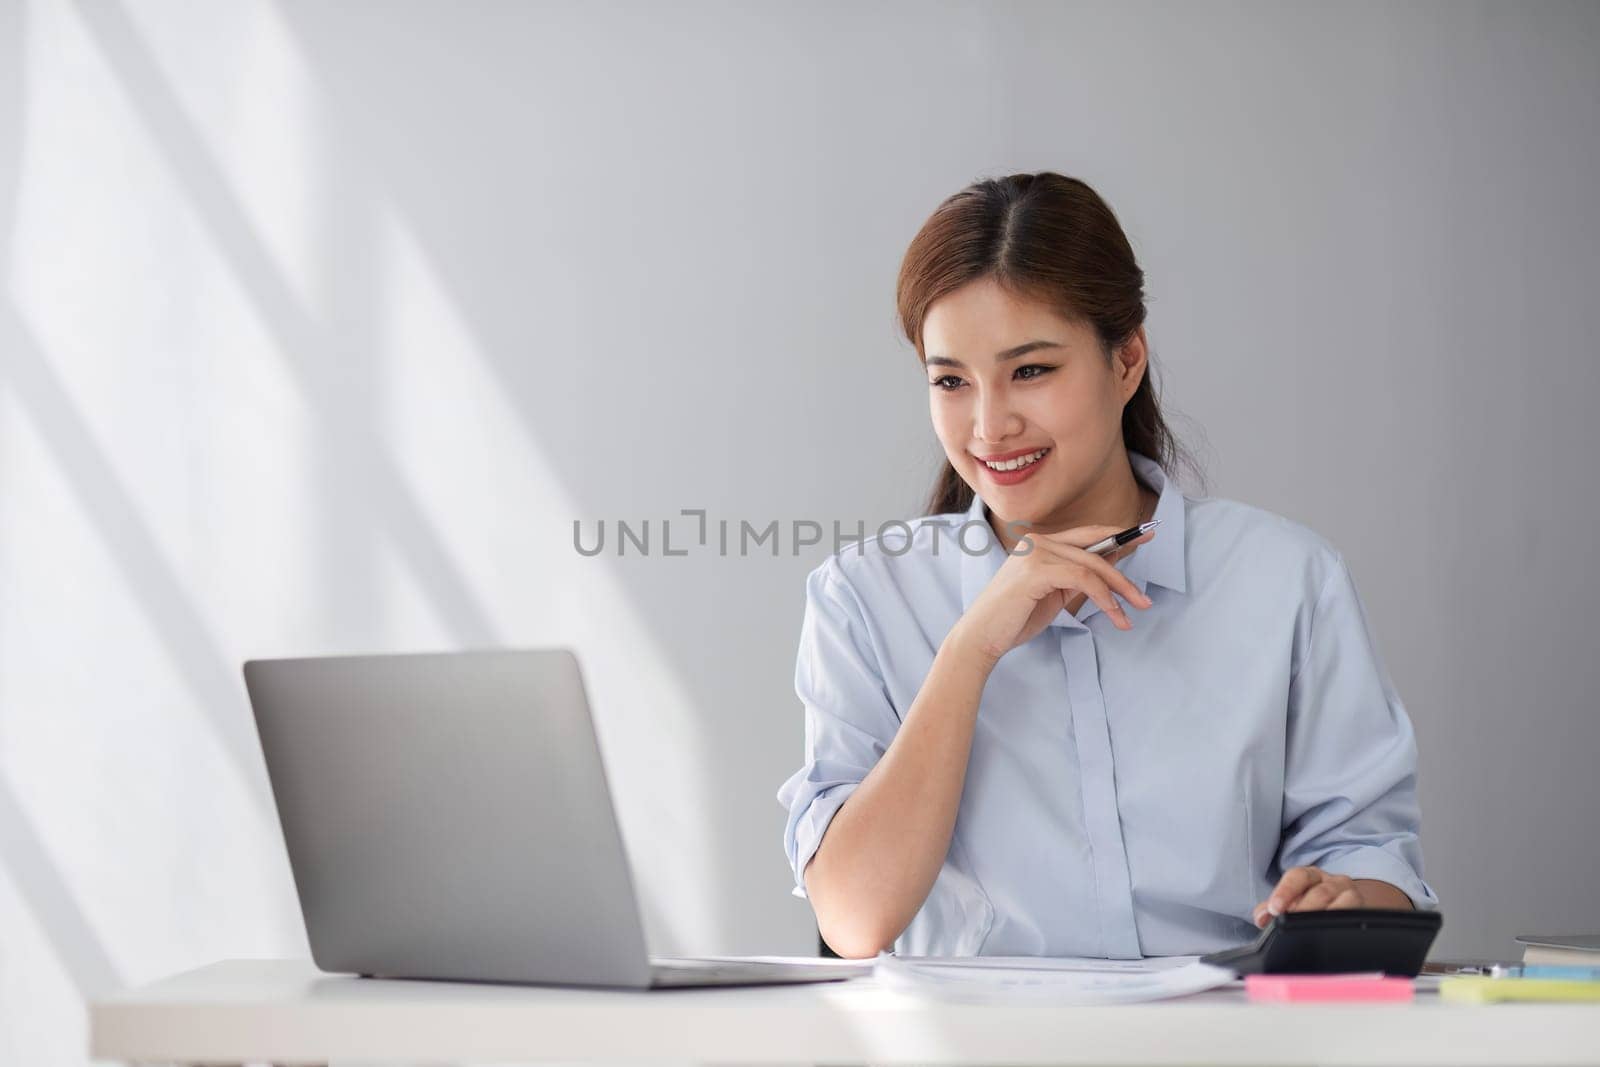 Happy middle-aged businesswoman working in the office. Businesswoman working on laptop and using in remote online job interview meeting on laptop..